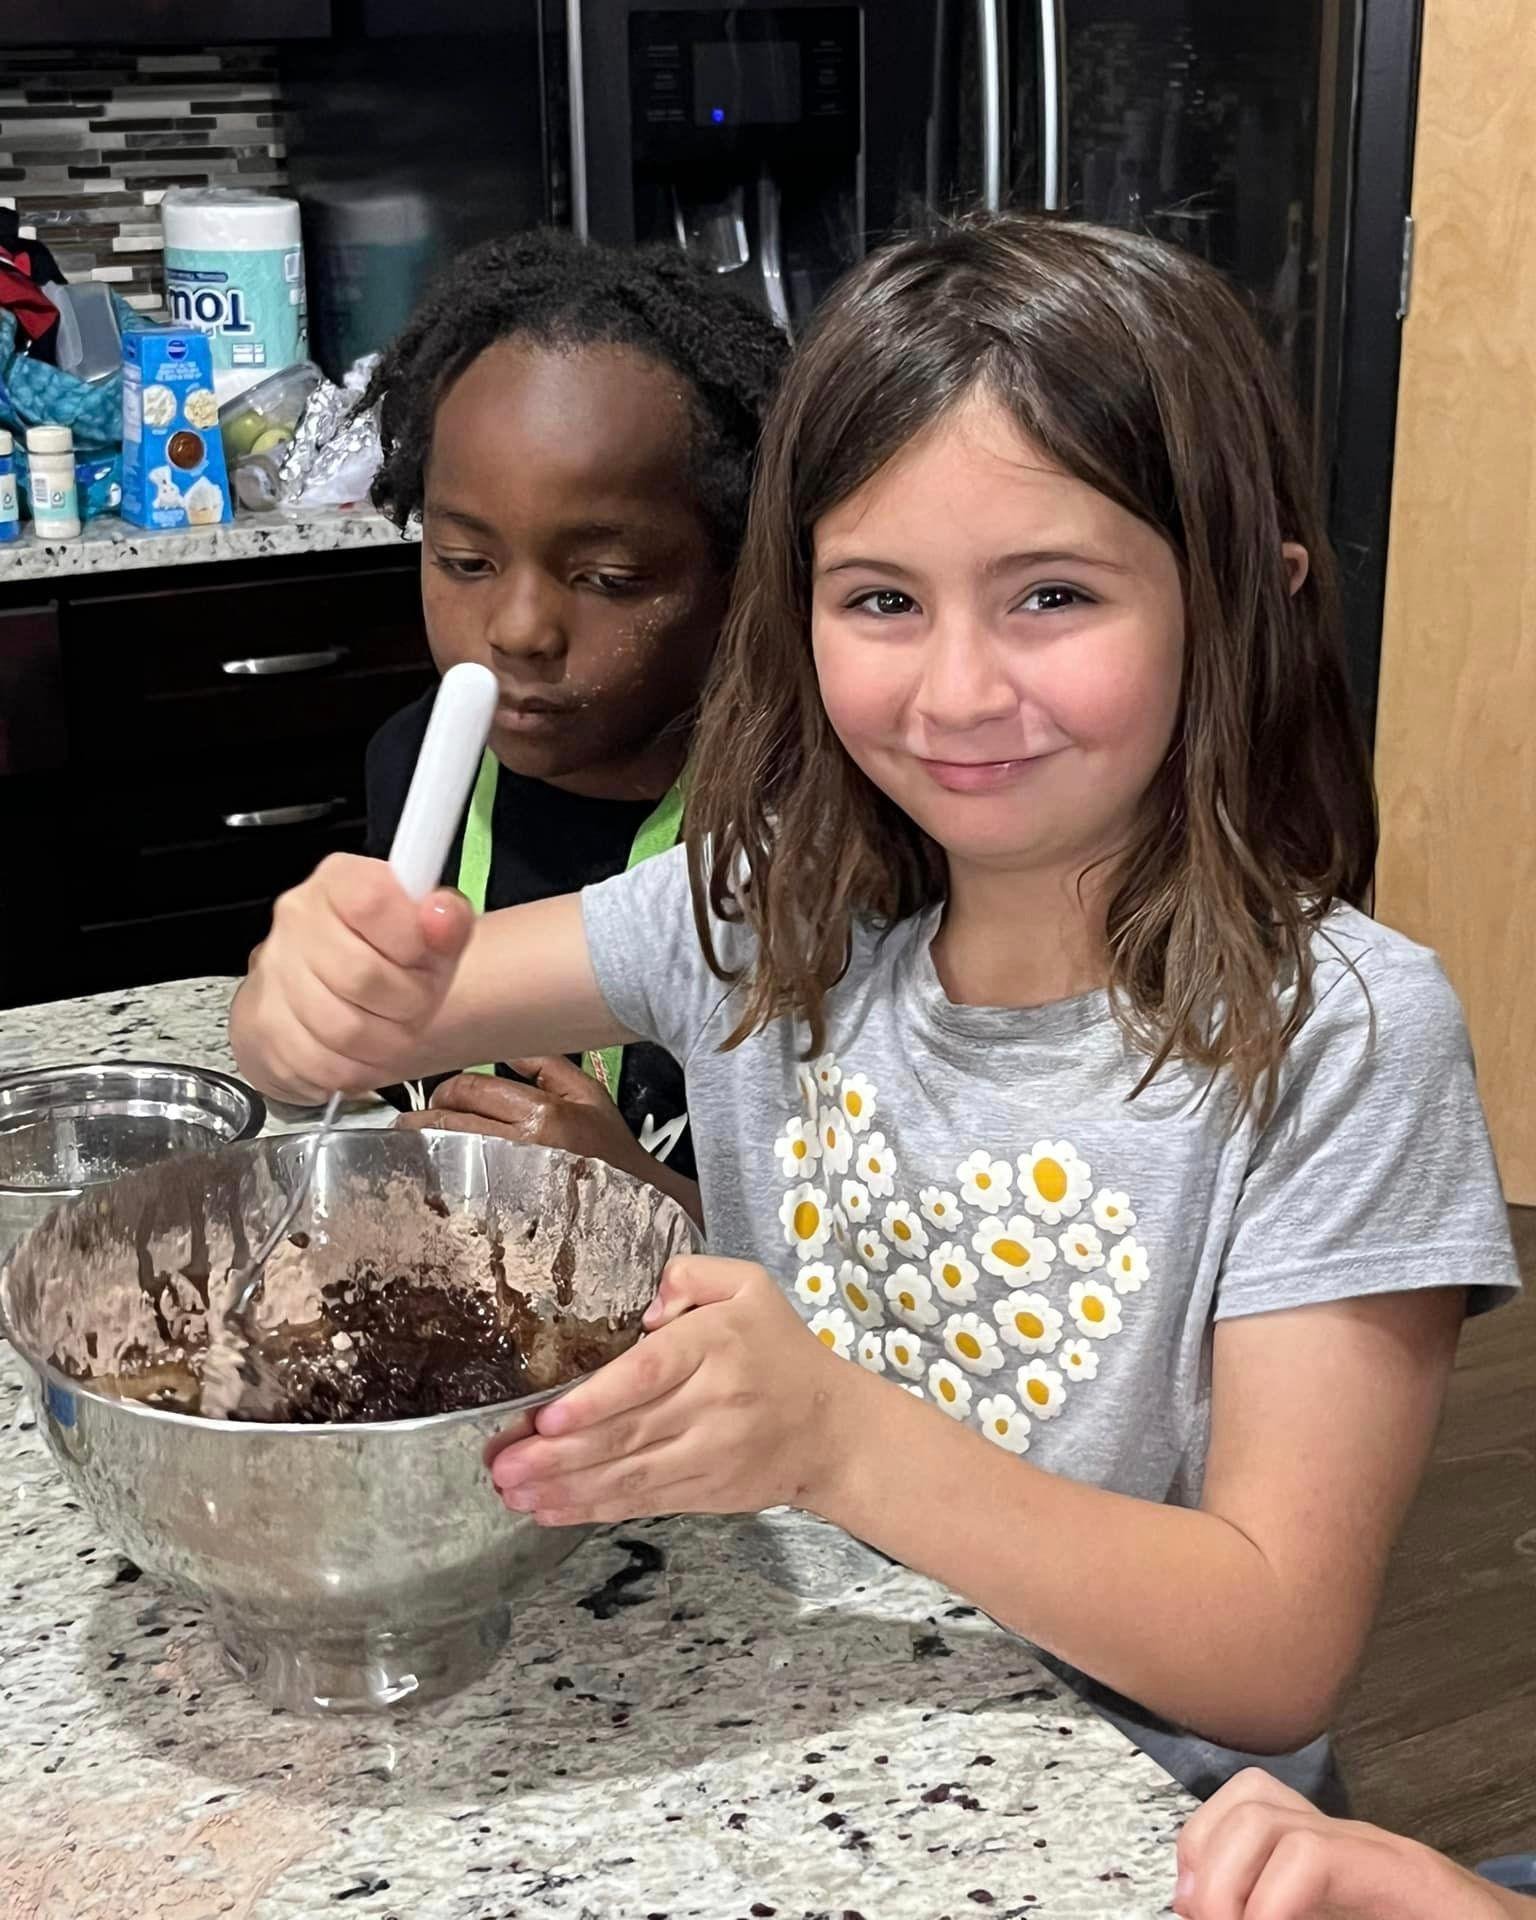 We're whipping up something tasty at Lighthouse Learning! 😋

We've been hard at work on all the goodies and creations we'll be offering at our Farmer's Market! A fundraiser that fully supports our students - and it wouldn't be possible without all t